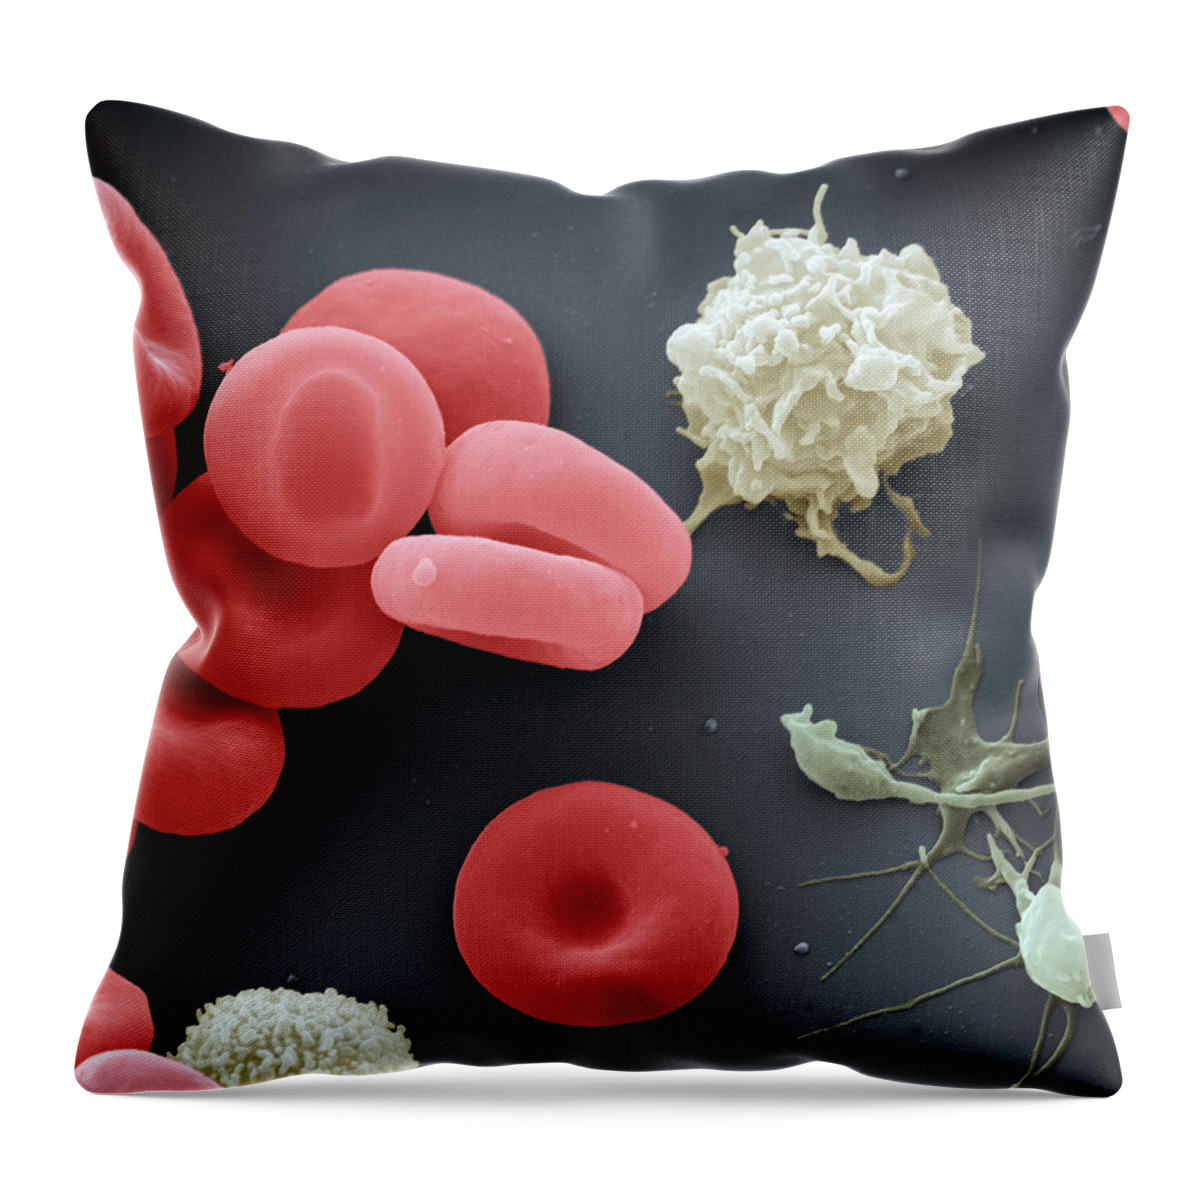 Blood Throw Pillow featuring the photograph Sem Of Blood Cells by Meckes/ottawa